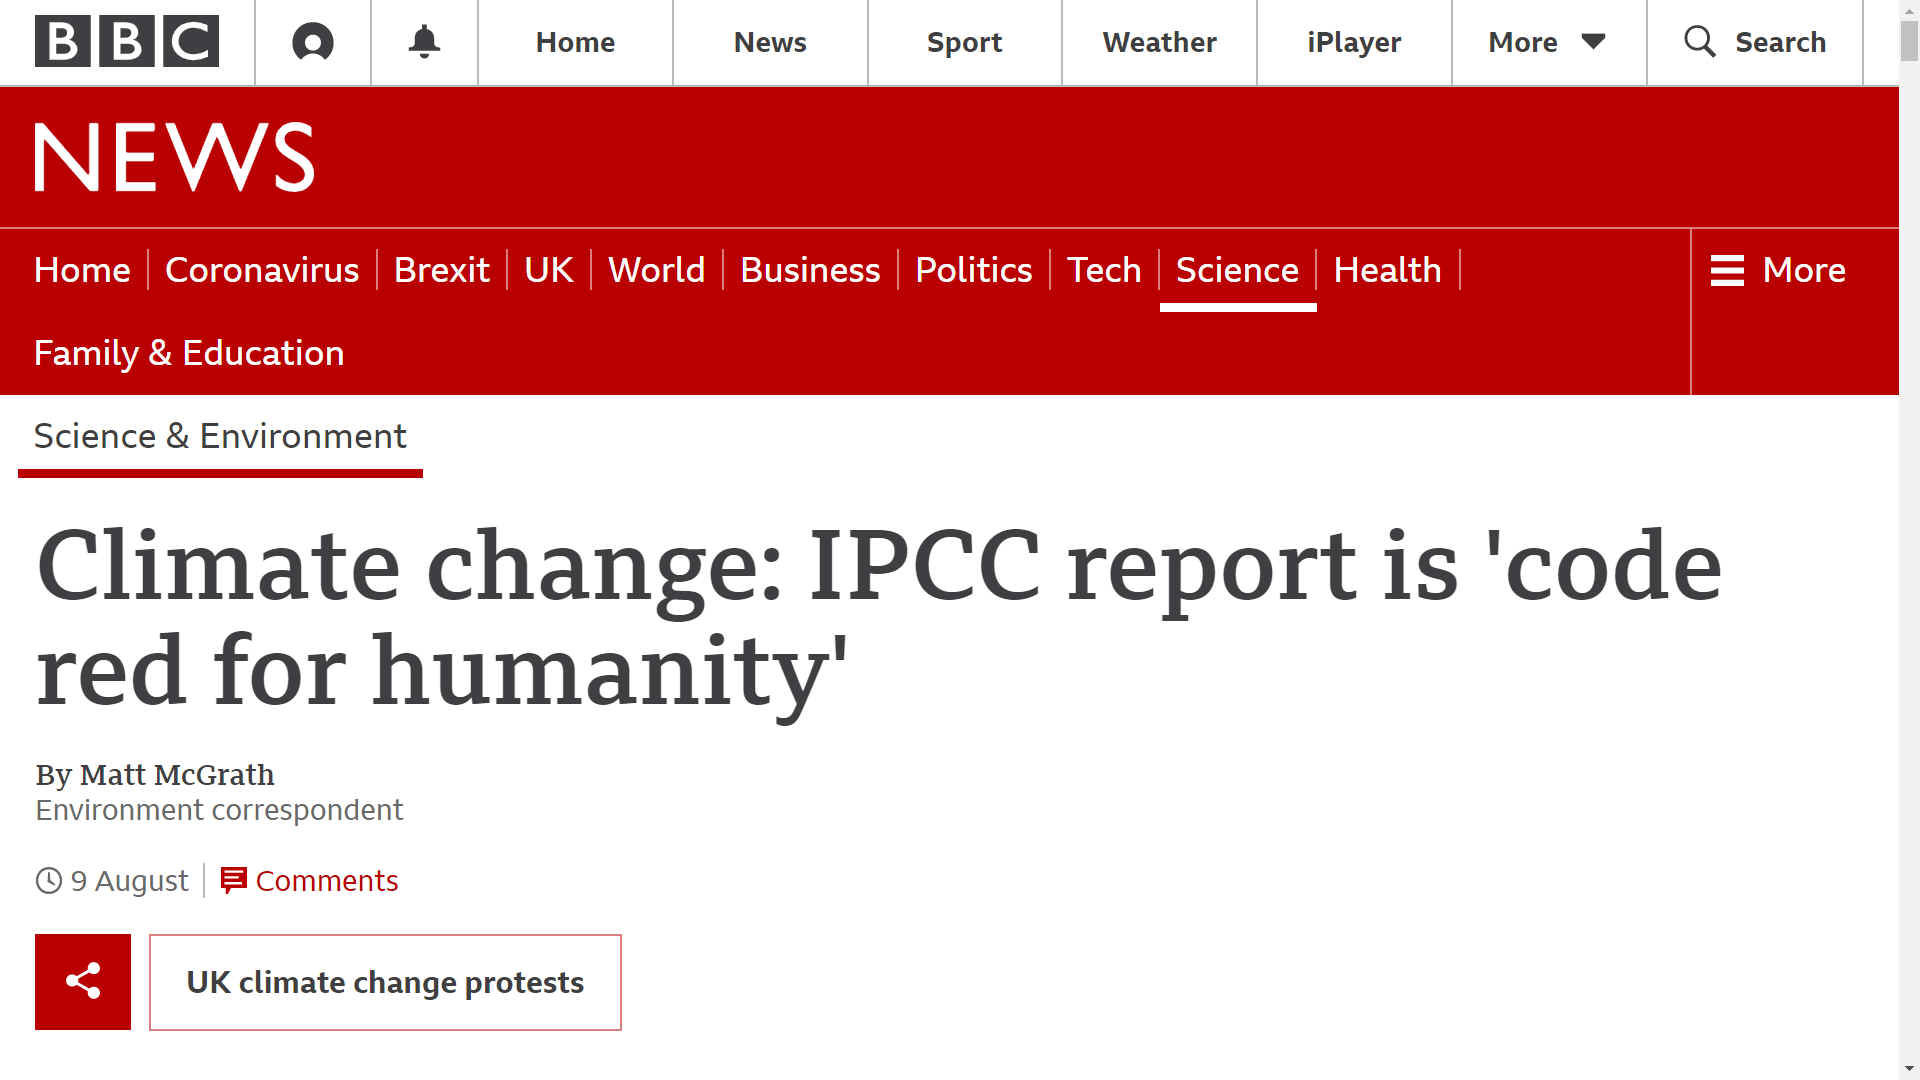 IPCC REPORT: CODE RED FOR HUMANITY